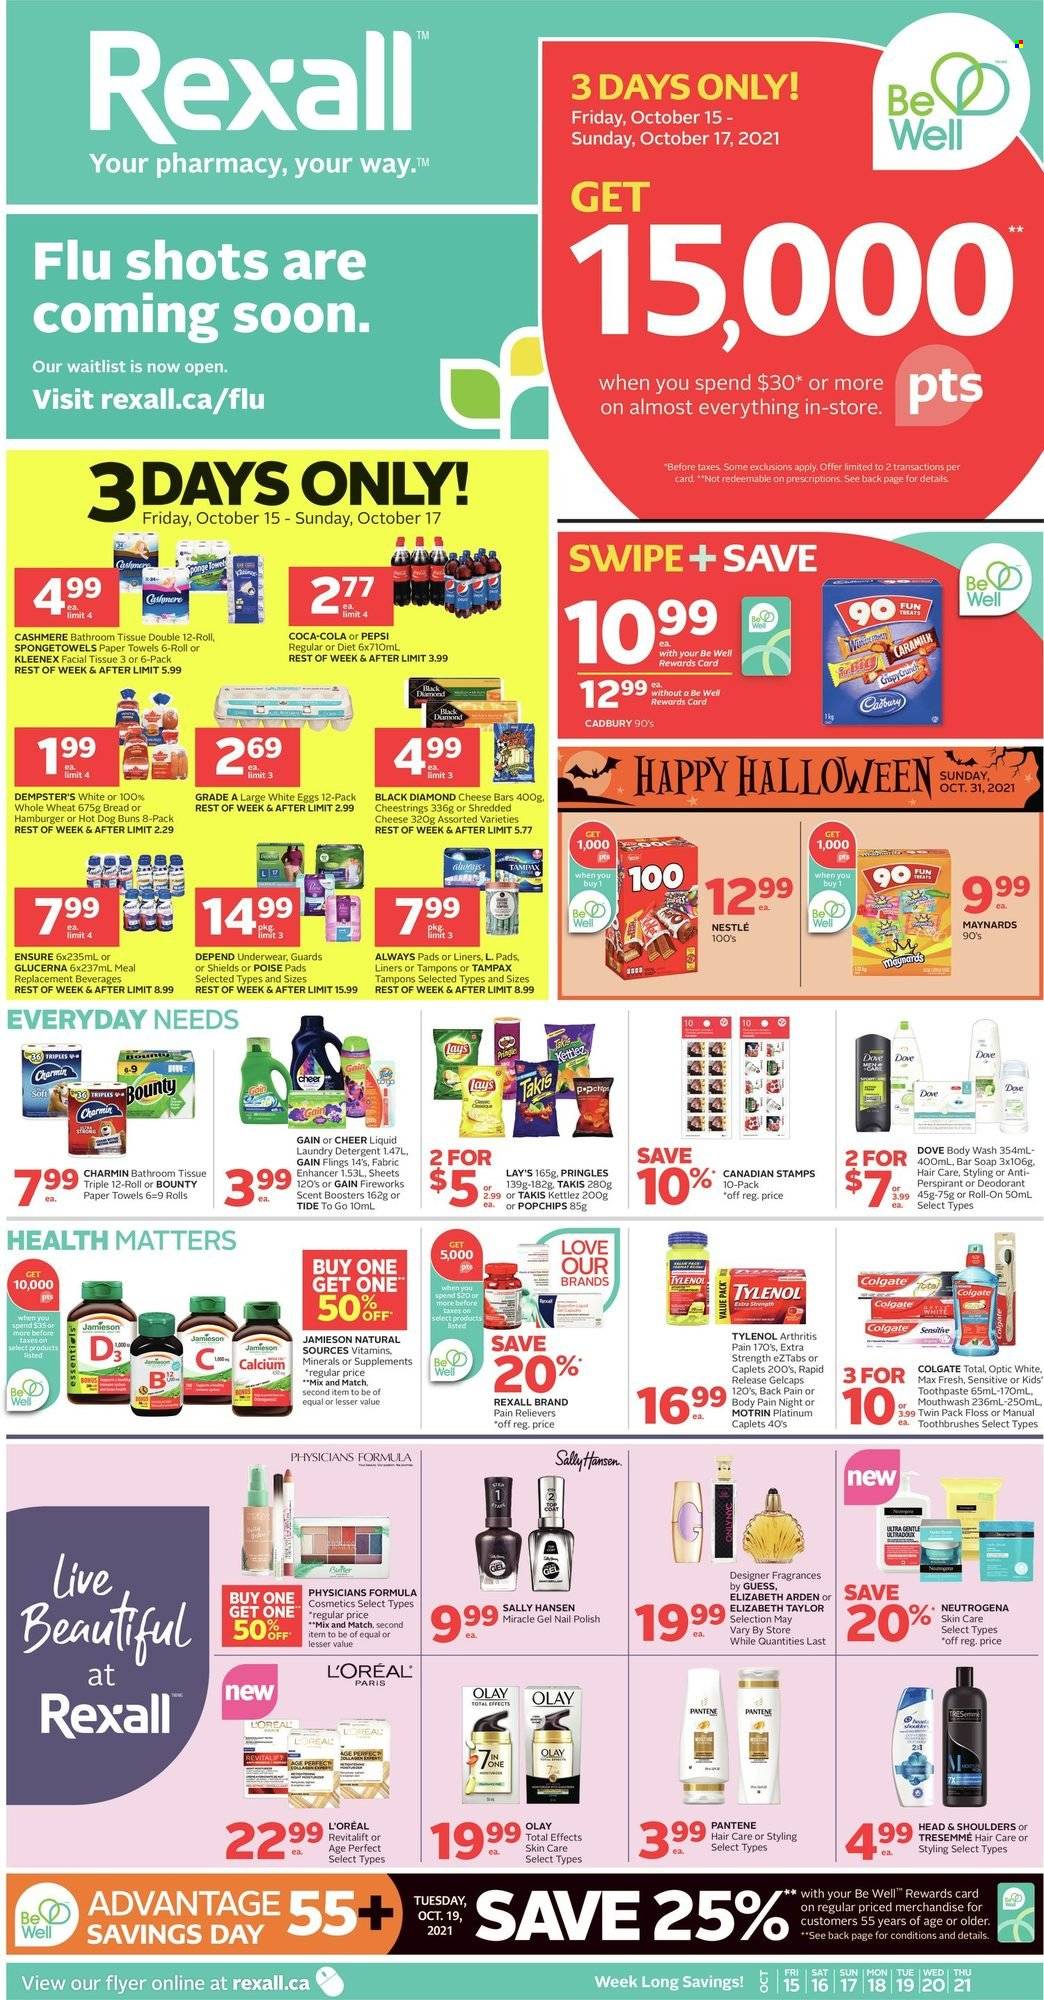 thumbnail - Rexall Flyer - October 15, 2021 - October 21, 2021 - Sales products - Bounty, Cadbury, Pringles, Lay’s, Coca-Cola, Pepsi, bath tissue, Kleenex, kitchen towels, paper towels, Charmin, Gain, Tide, laundry detergent, scent booster, Gain Fireworks, body wash, soap bar, soap, toothpaste, mouthwash, Always pads, sanitary pads, tampons, L’Oréal, Olay, TRESemmé, anti-perspirant, roll-on, Guess, polish, Tylenol, Glucerna, Motrin, Nestlé, calcium, detergent, Dove, Elizabeth Arden, Colgate, Neutrogena, Sally Hansen, Tampax, Head & Shoulders, Pantene, deodorant. Page 1.